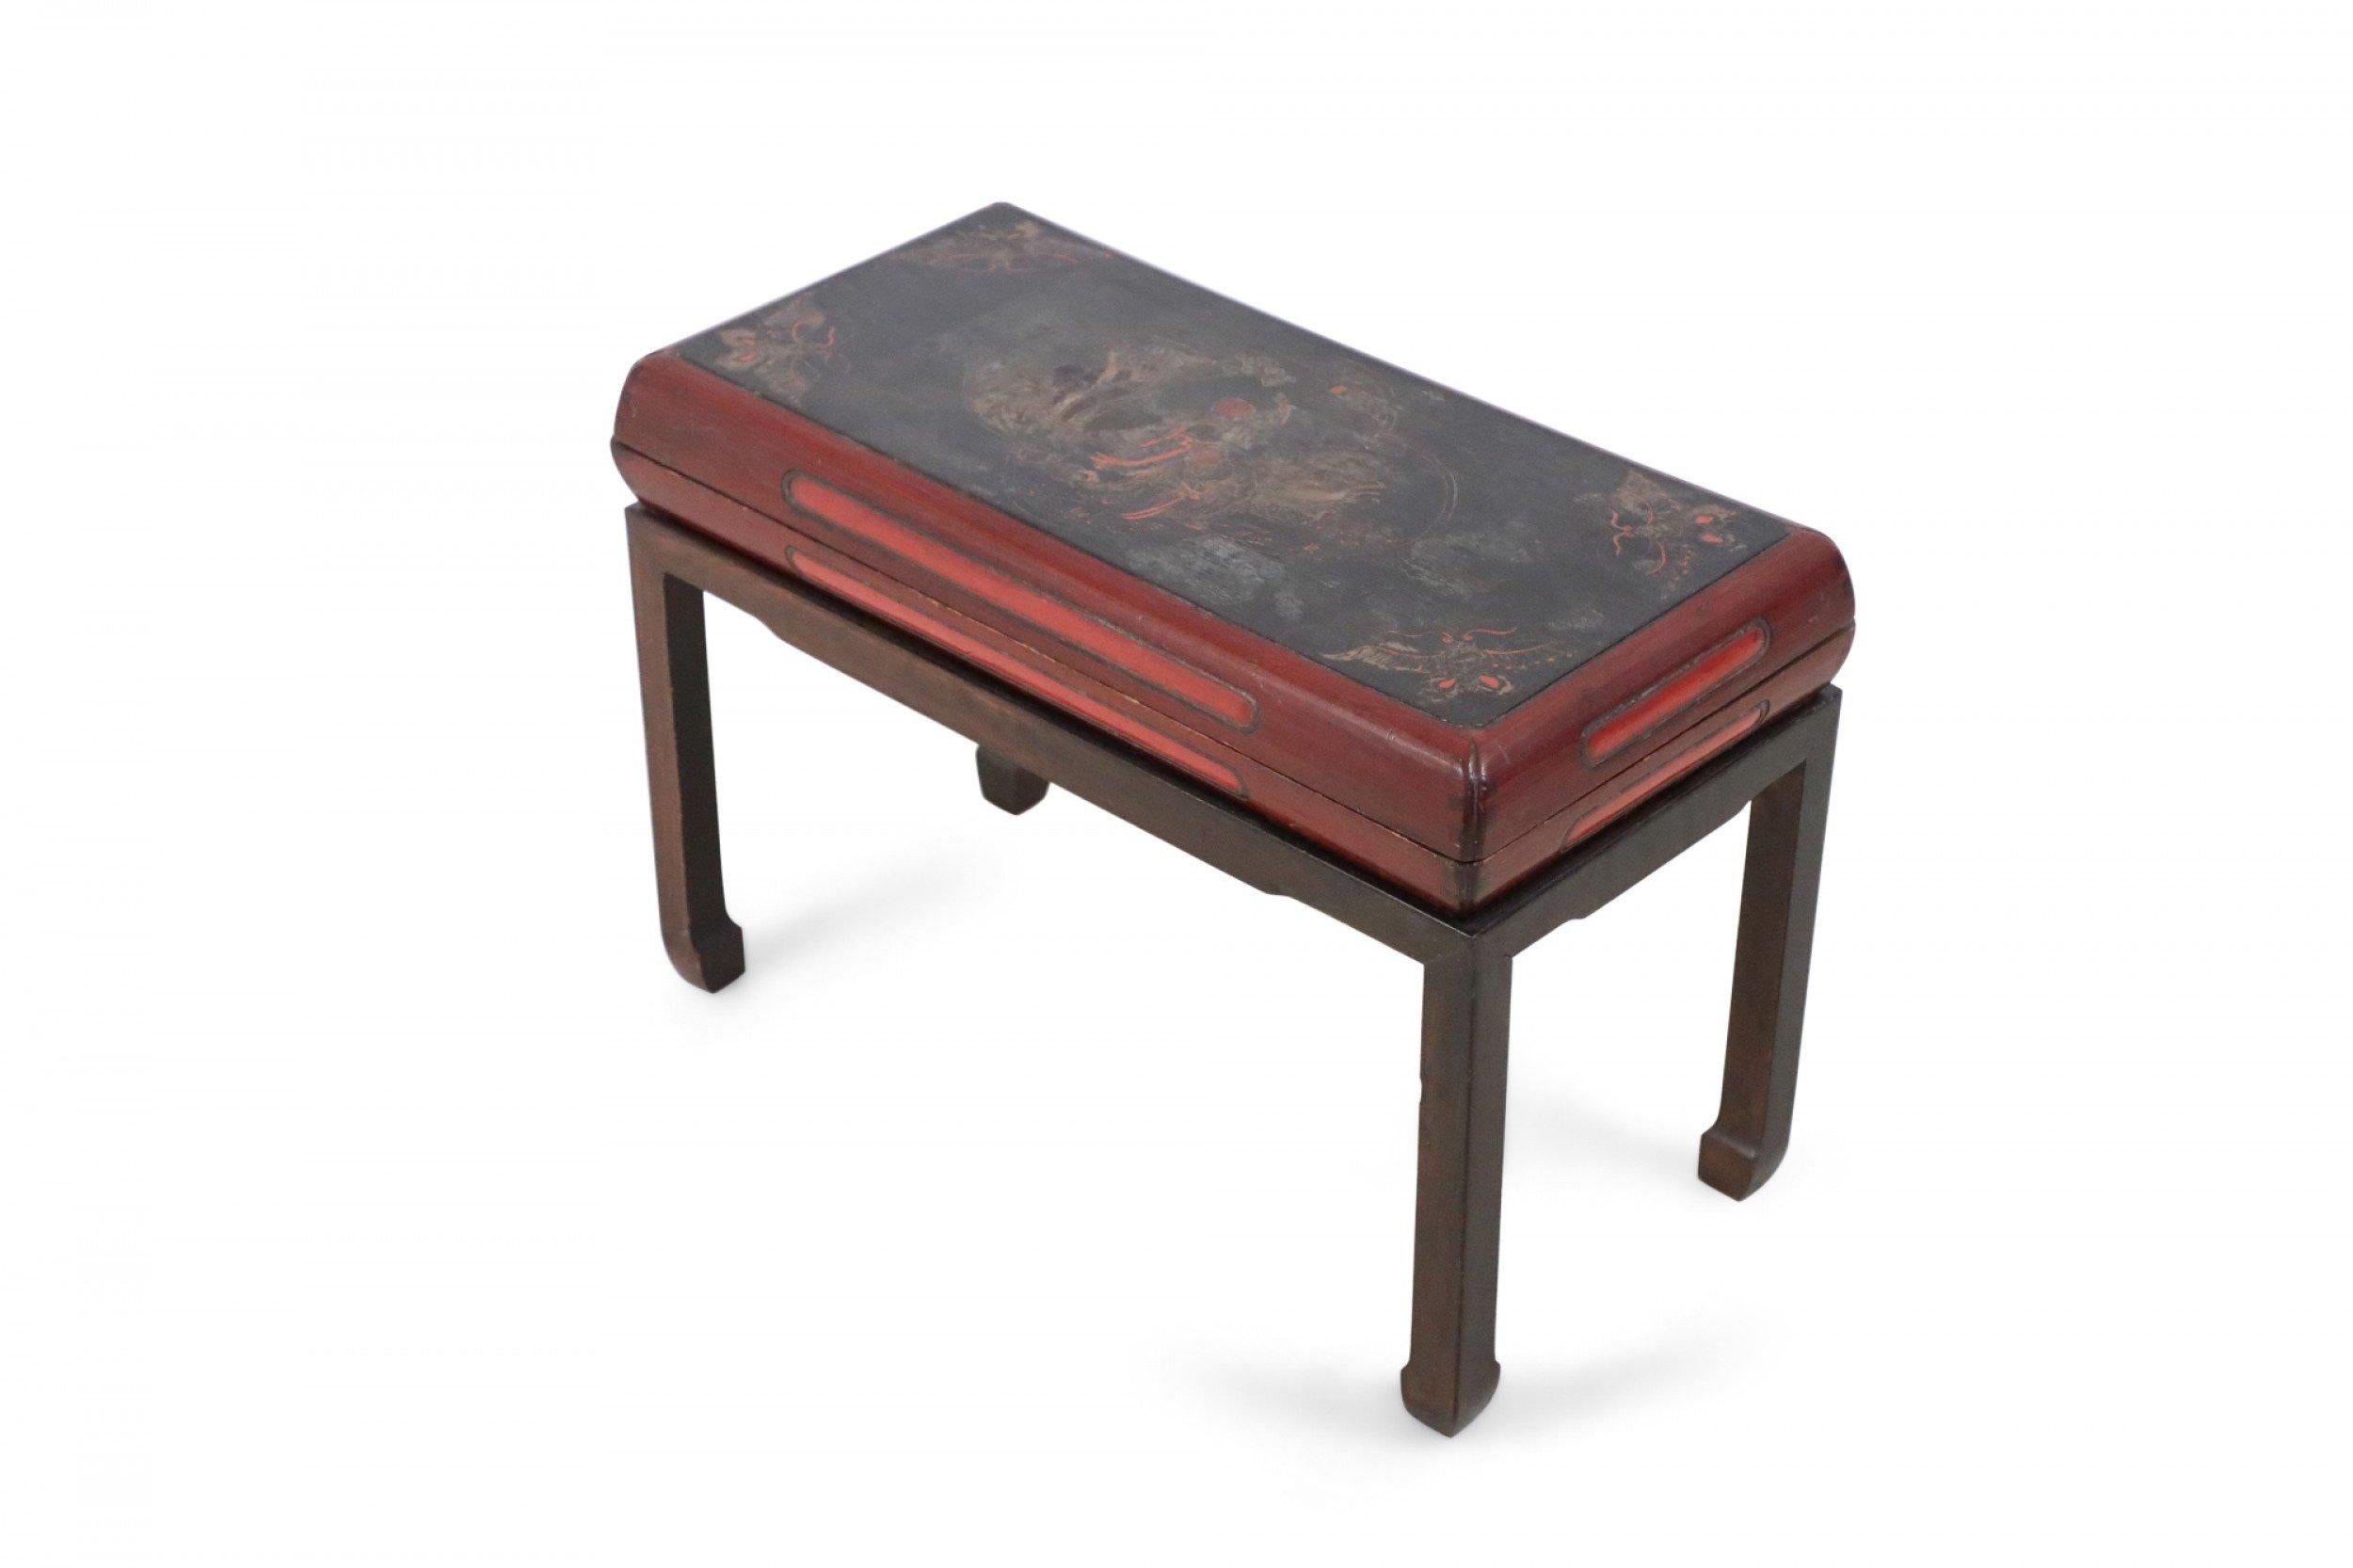 Antique Chinese (Early Republic) wooden bench with removeable, red-sided, black two-piece top painted in a gold and red central figurative scene and moths in each corner, supported by a wooden frame with square legs.